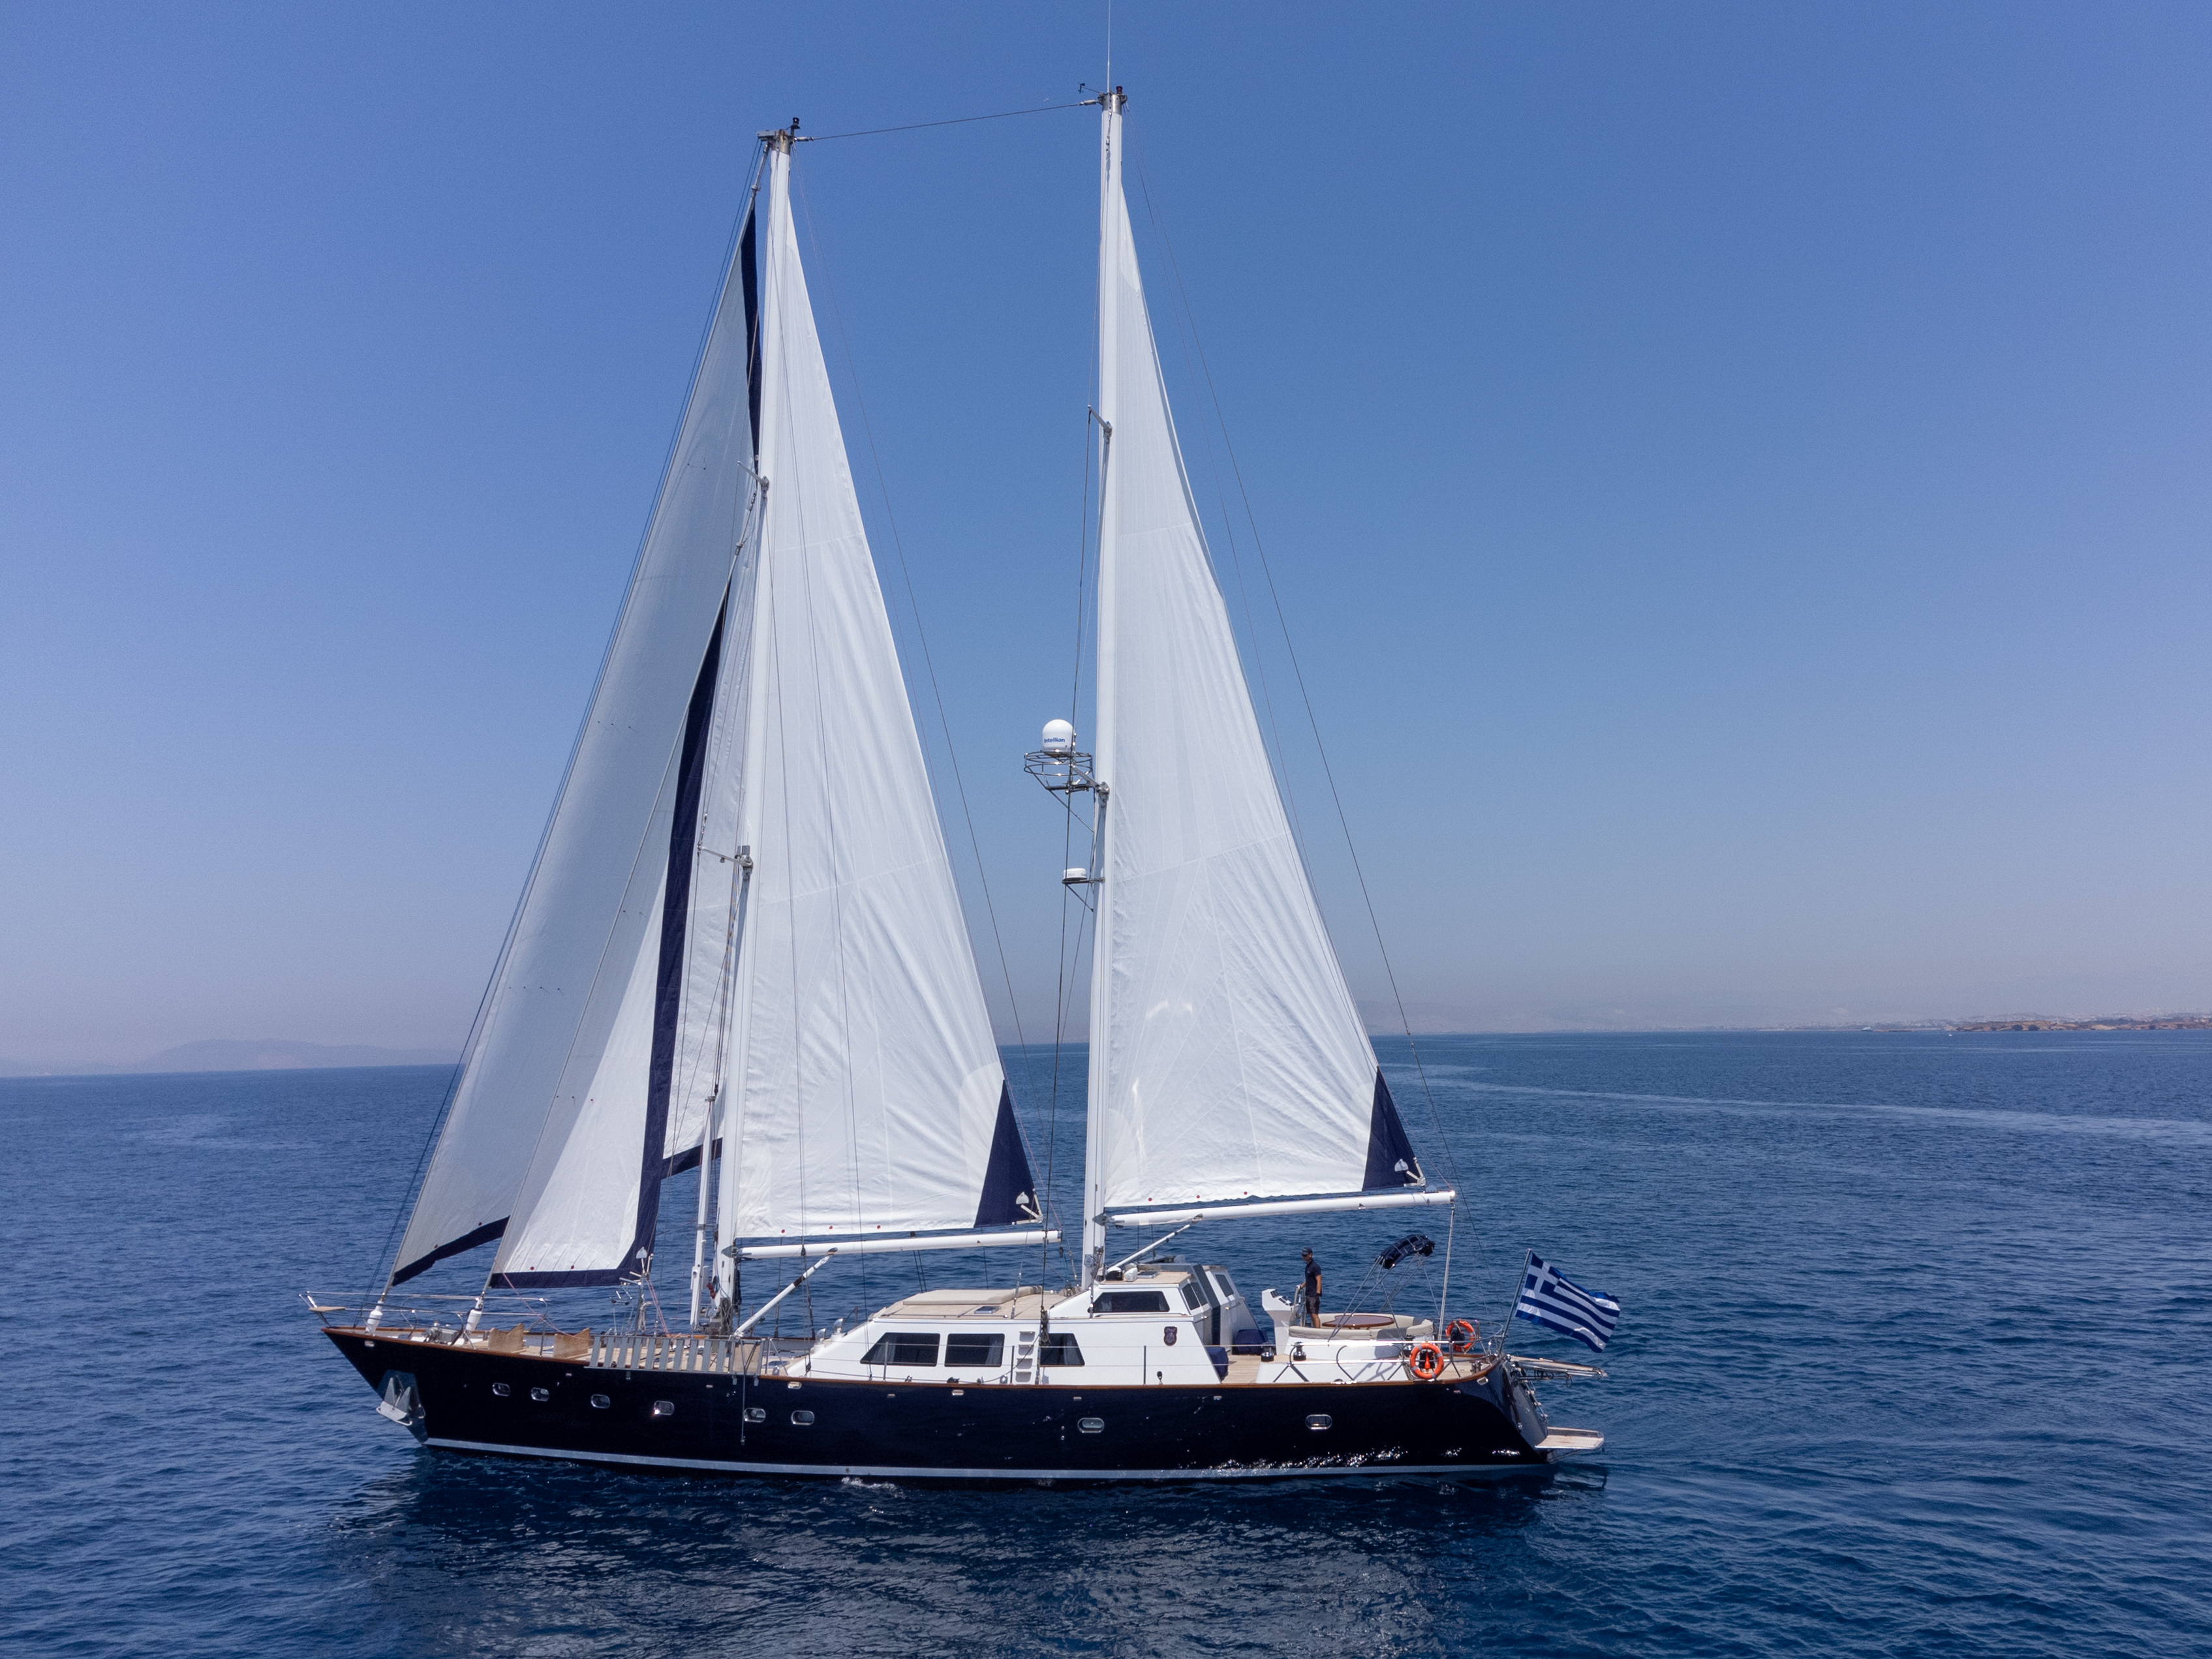 CCYD 85 - Superyacht charter St Martin & Boat hire in Greece Athens and Saronic Gulf Athens Piraeus Marina Zea 5